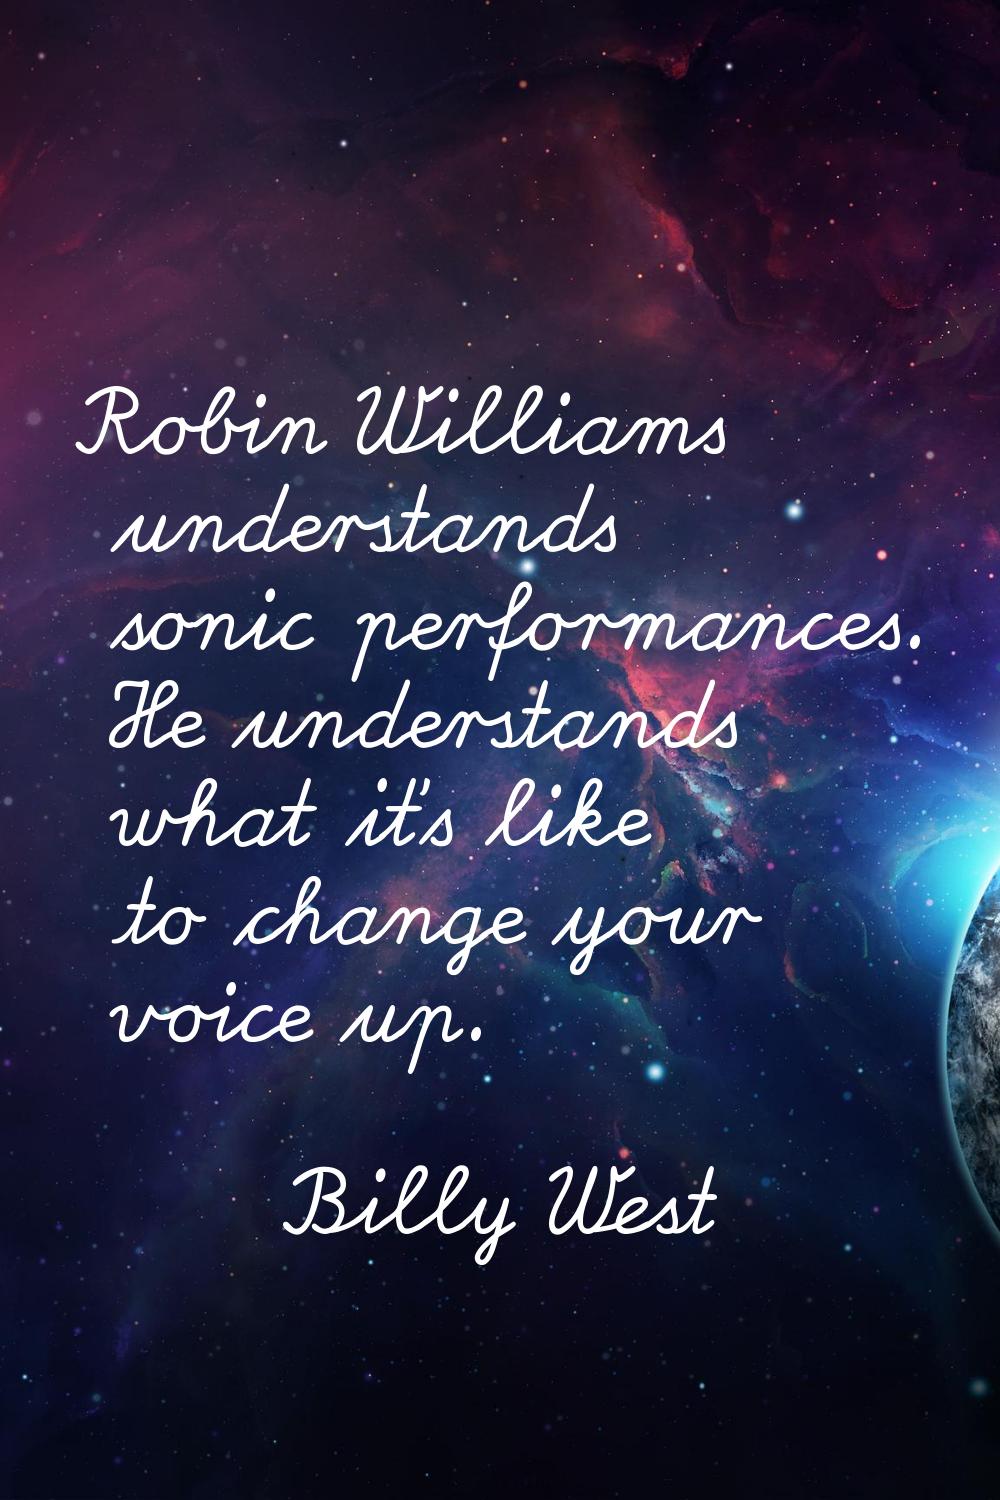 Robin Williams understands sonic performances. He understands what it's like to change your voice u